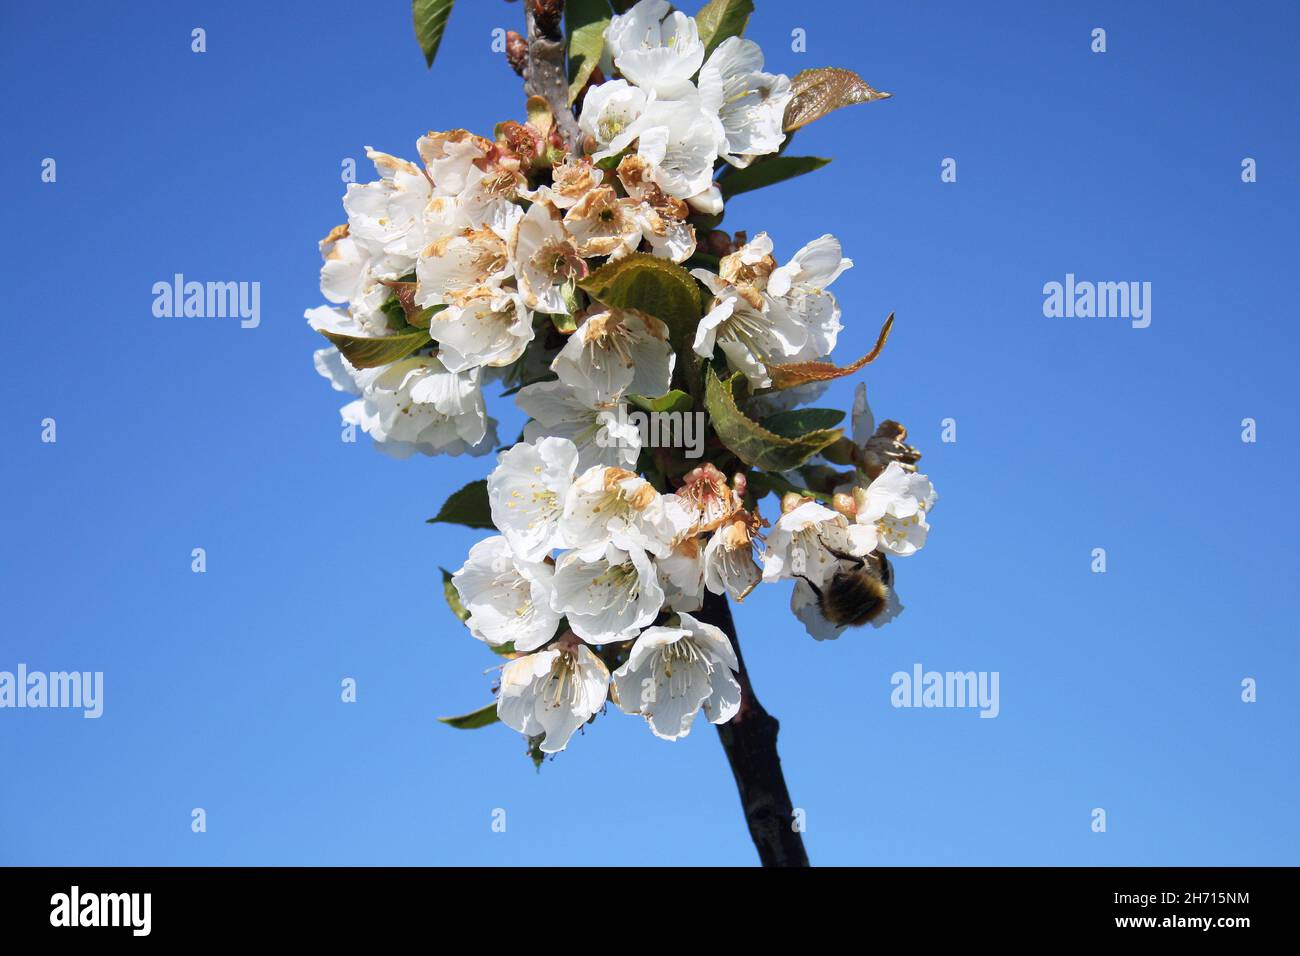 Bumble bee on cherry tree branch with white flowers, with a blue sky in the background Stock Photo